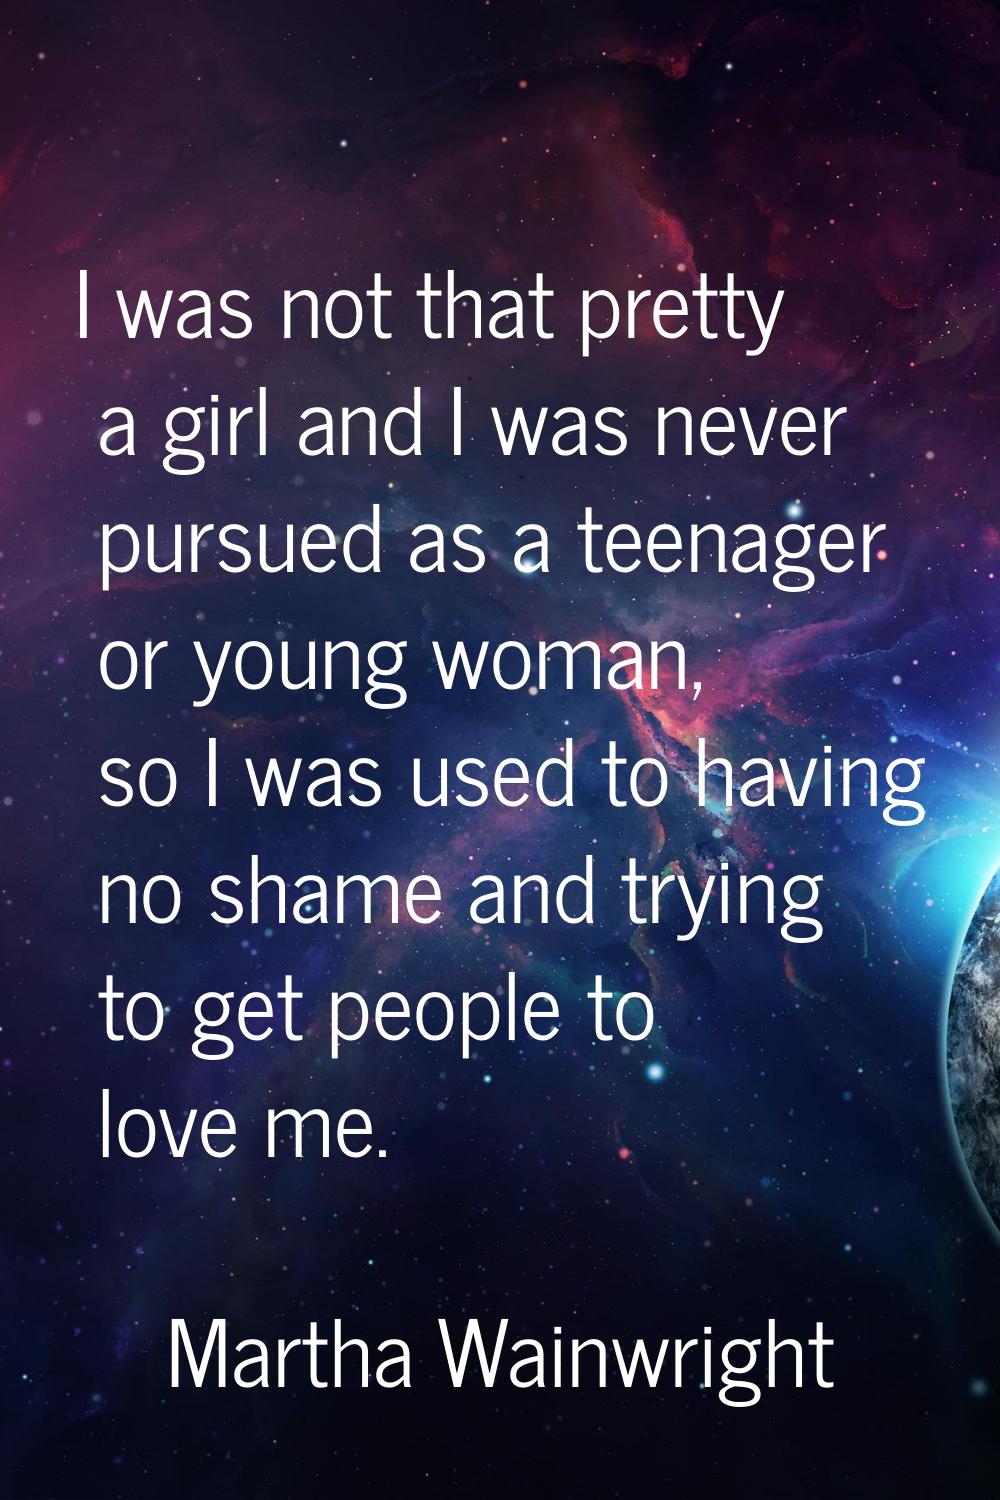 I was not that pretty a girl and I was never pursued as a teenager or young woman, so I was used to